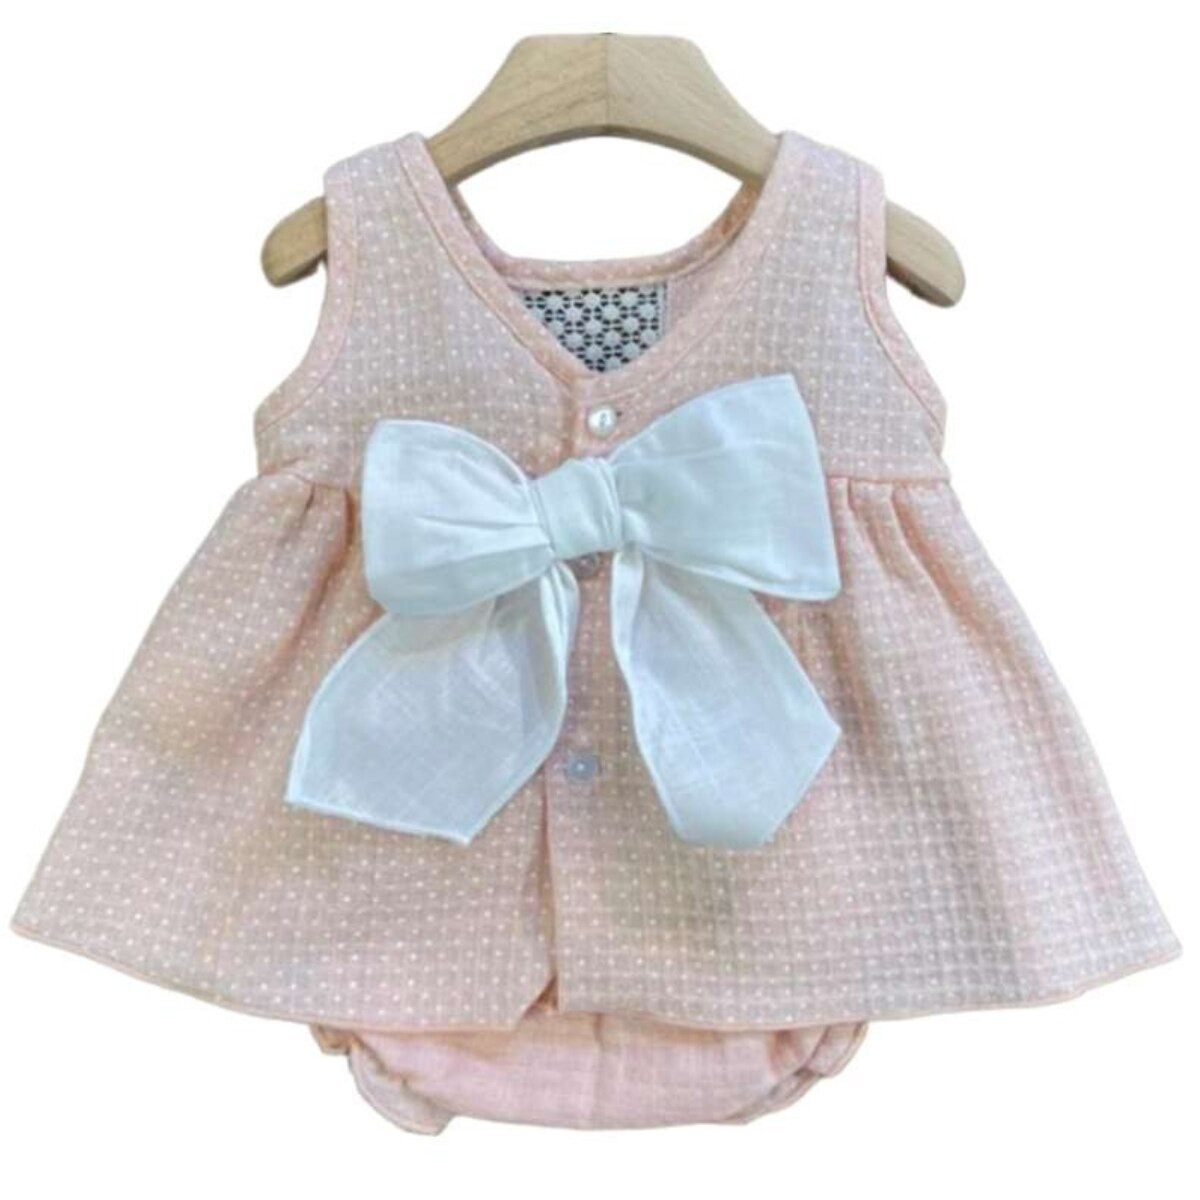 GIRLS FLOUNCED DRESS AND NAPPY COVER CALAMARO - 2